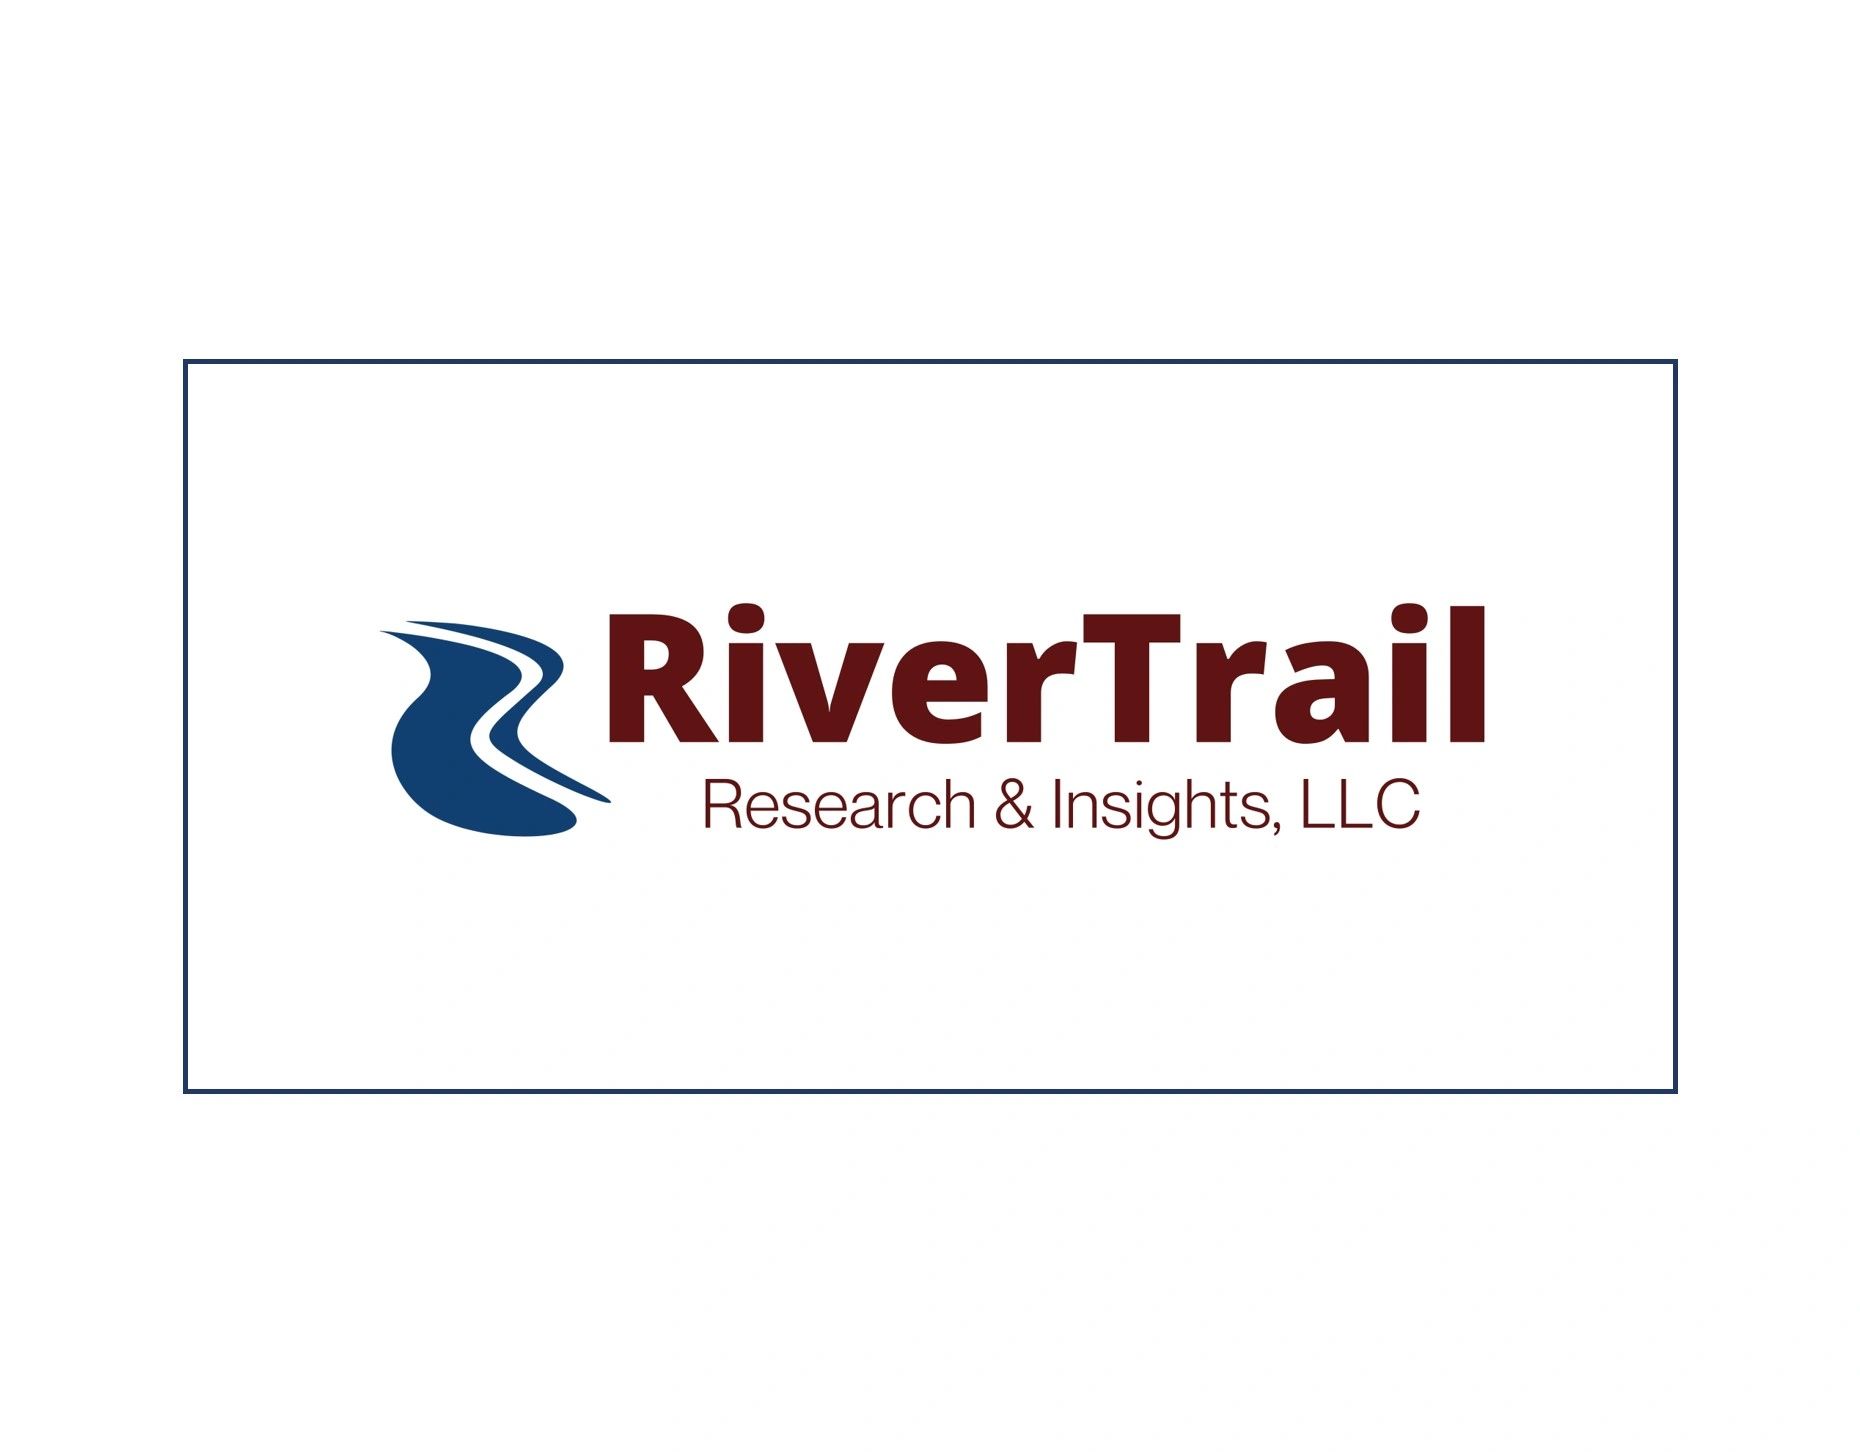 RiverTrail Research & Insights logo